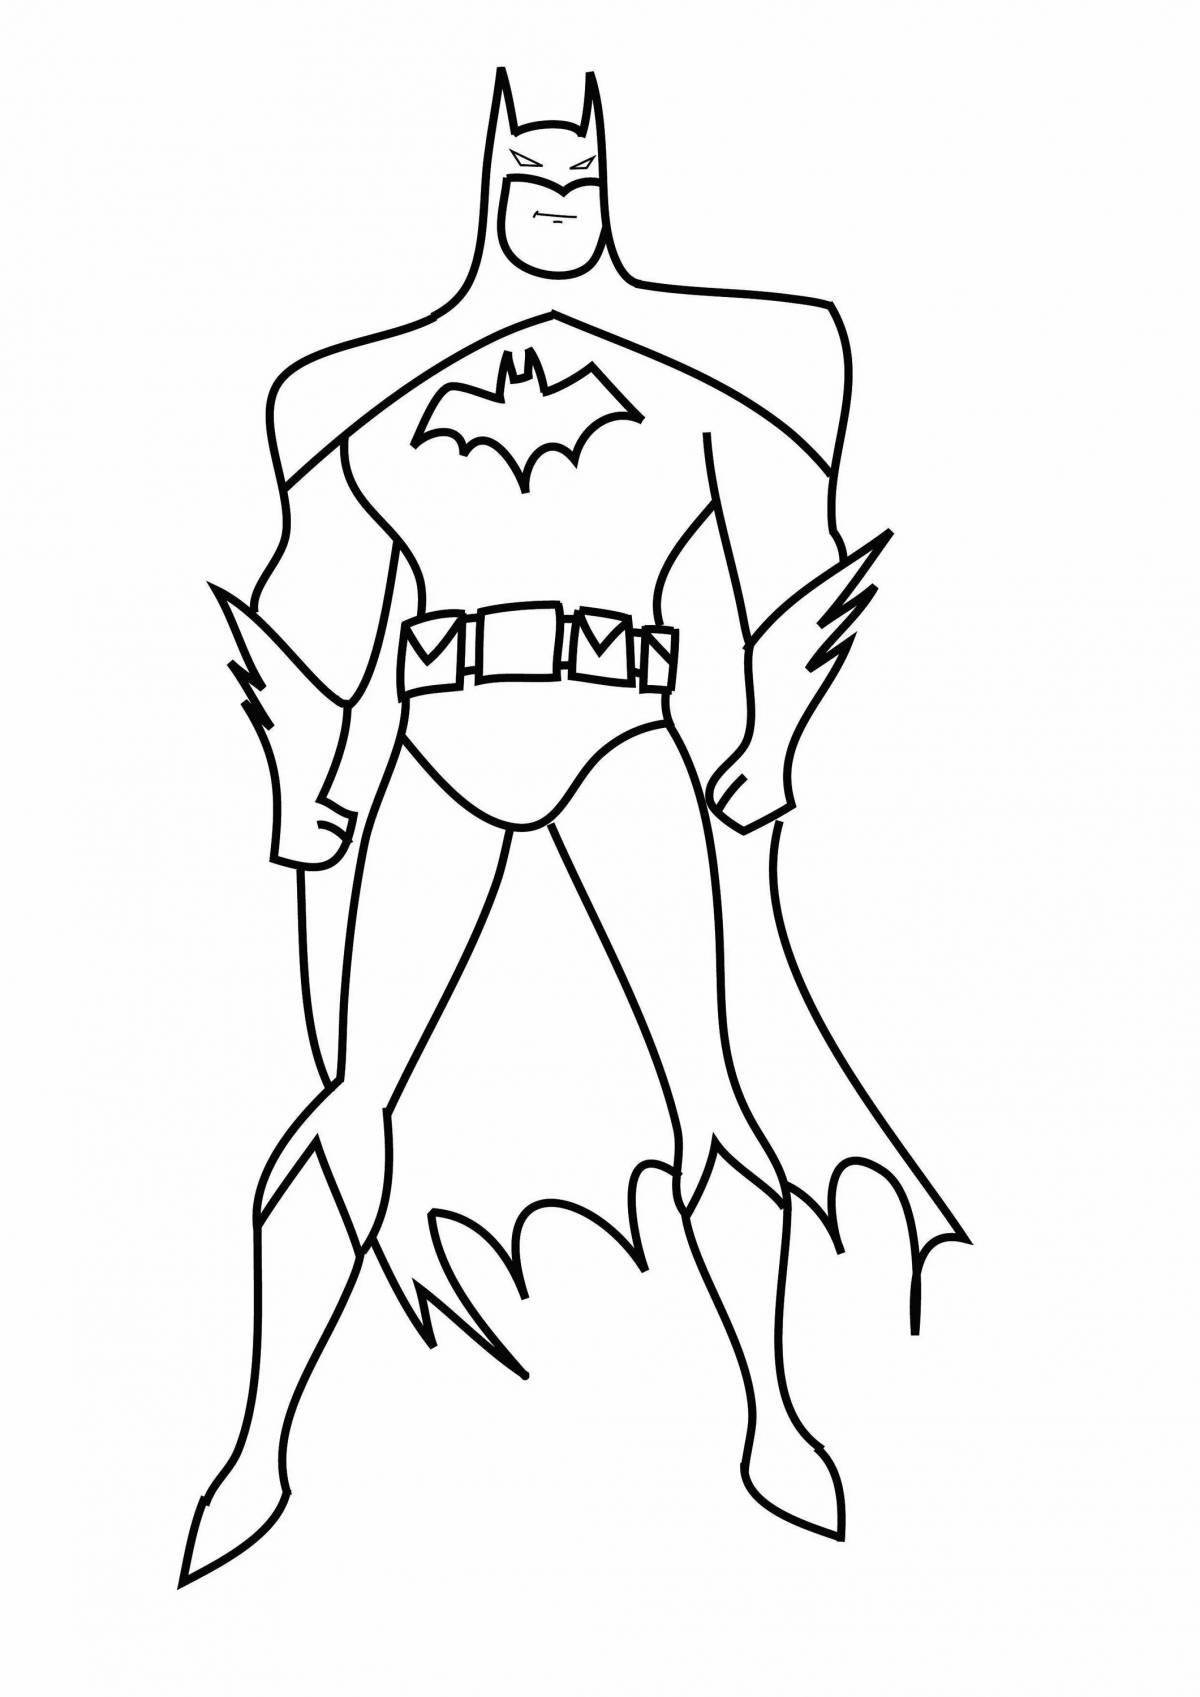 Fantastic superhero coloring book for 4-5 year olds